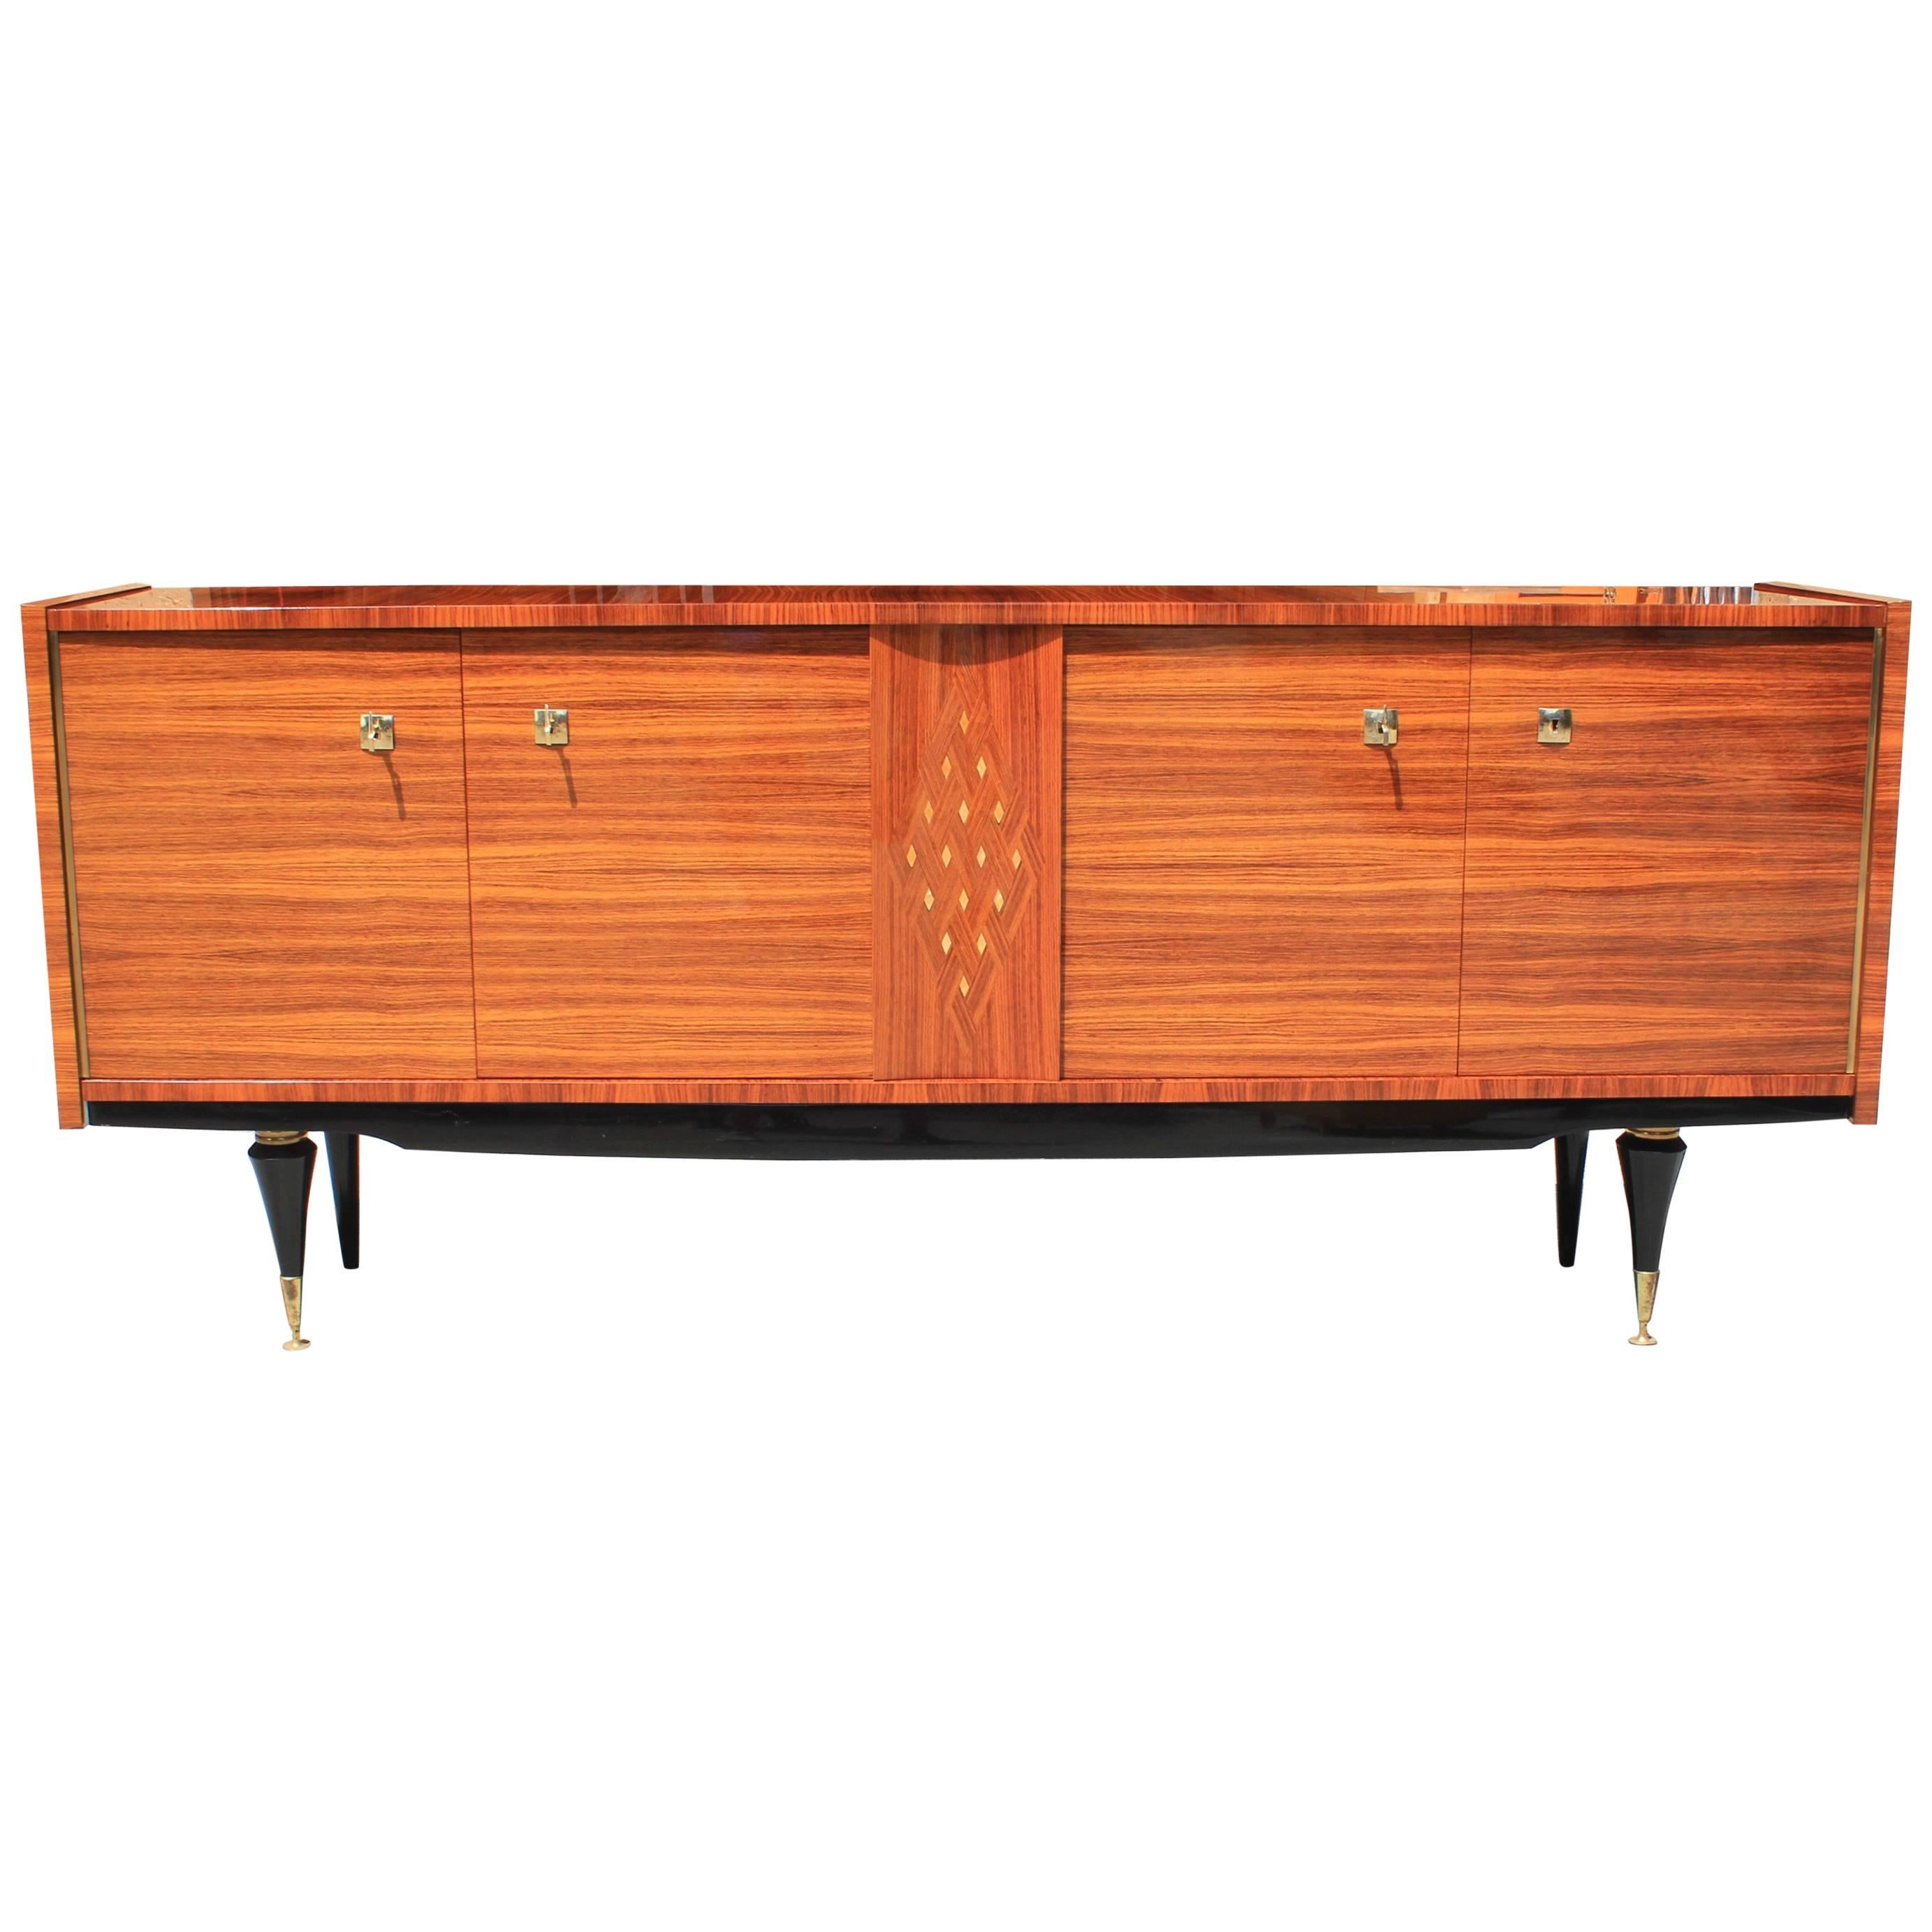 French Art Deco Light Macassar Sideboard with Diamond Mother-of-pearl Center